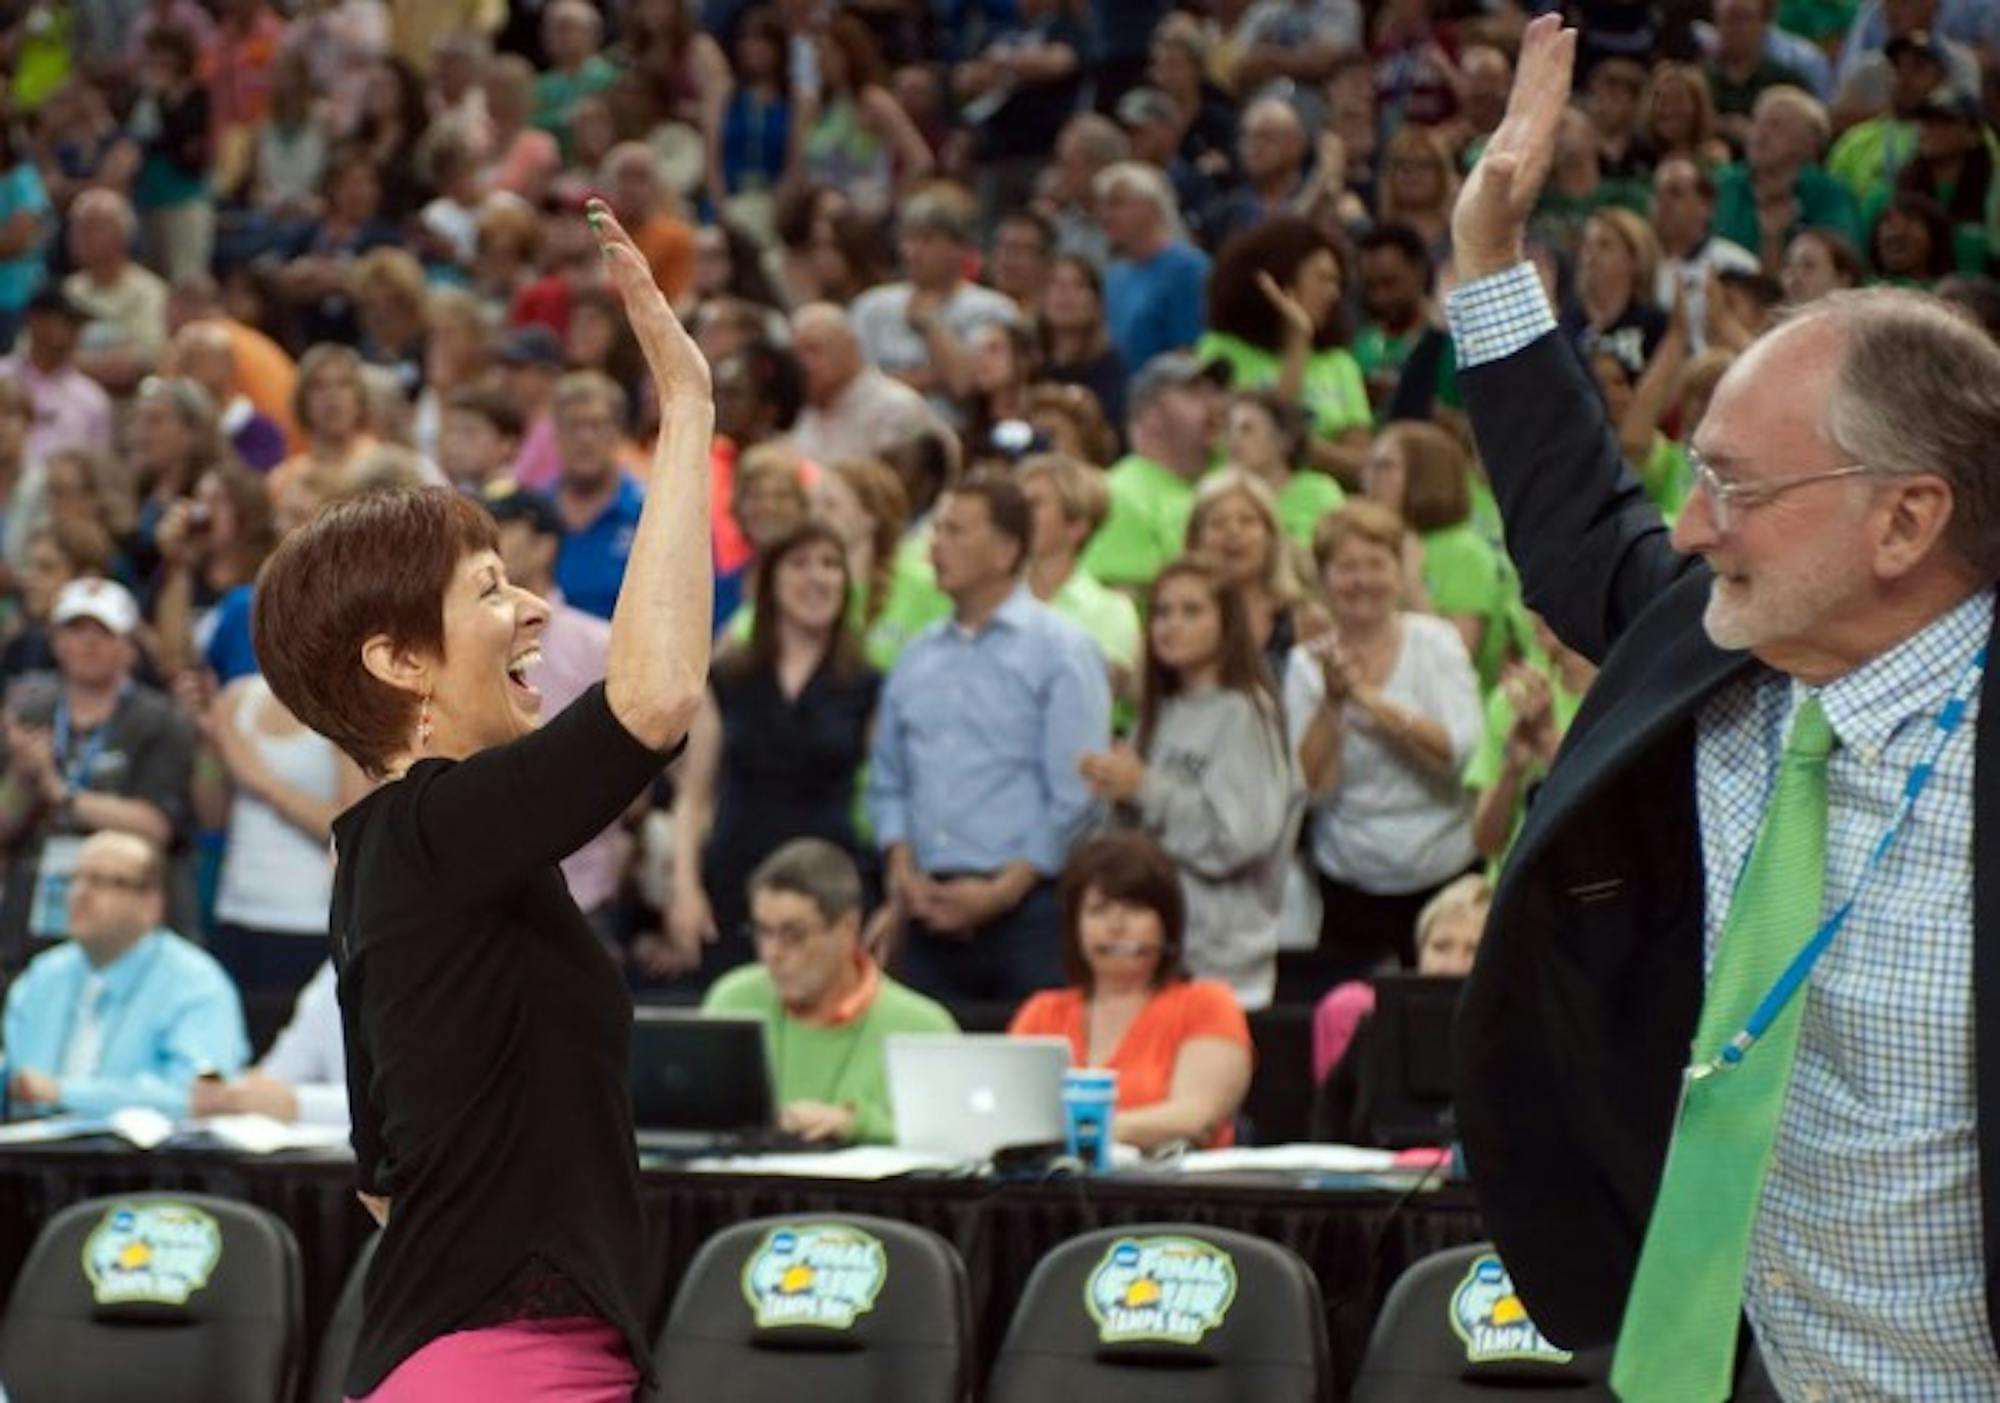 Irish head coach Muffet McGraw high-fives Director of Athletics Jack Swarbrick after Notre Dame’s last-    second, 66-65 win over South Carolina in the national semifinal April 5 at Amalie Arena in Tampa, Fla.